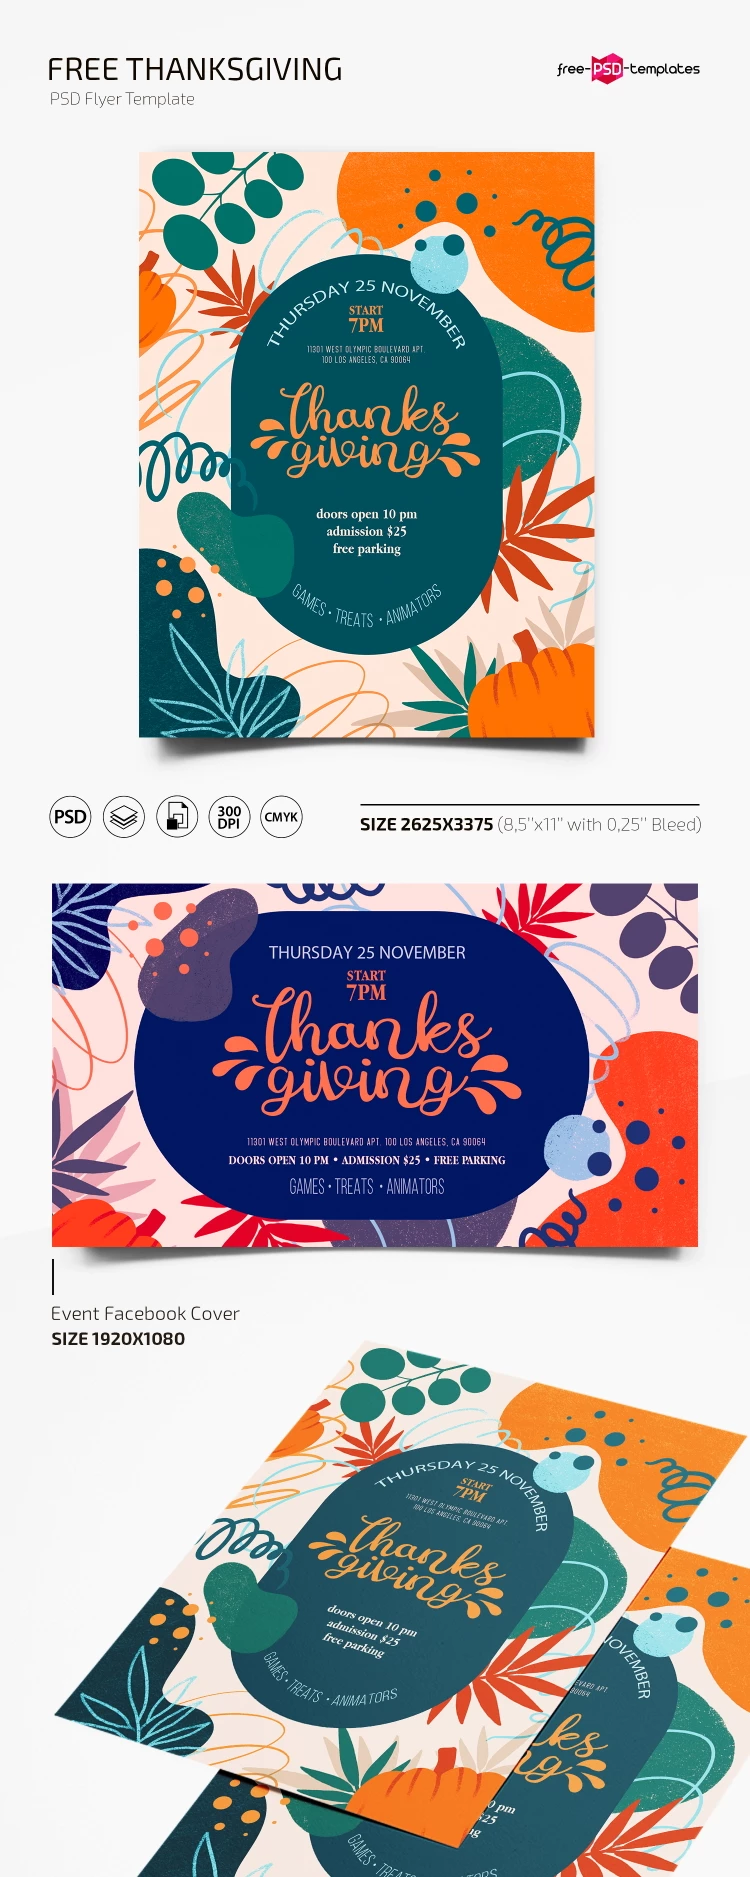 Free Thanksgiving Flyer PSD Template